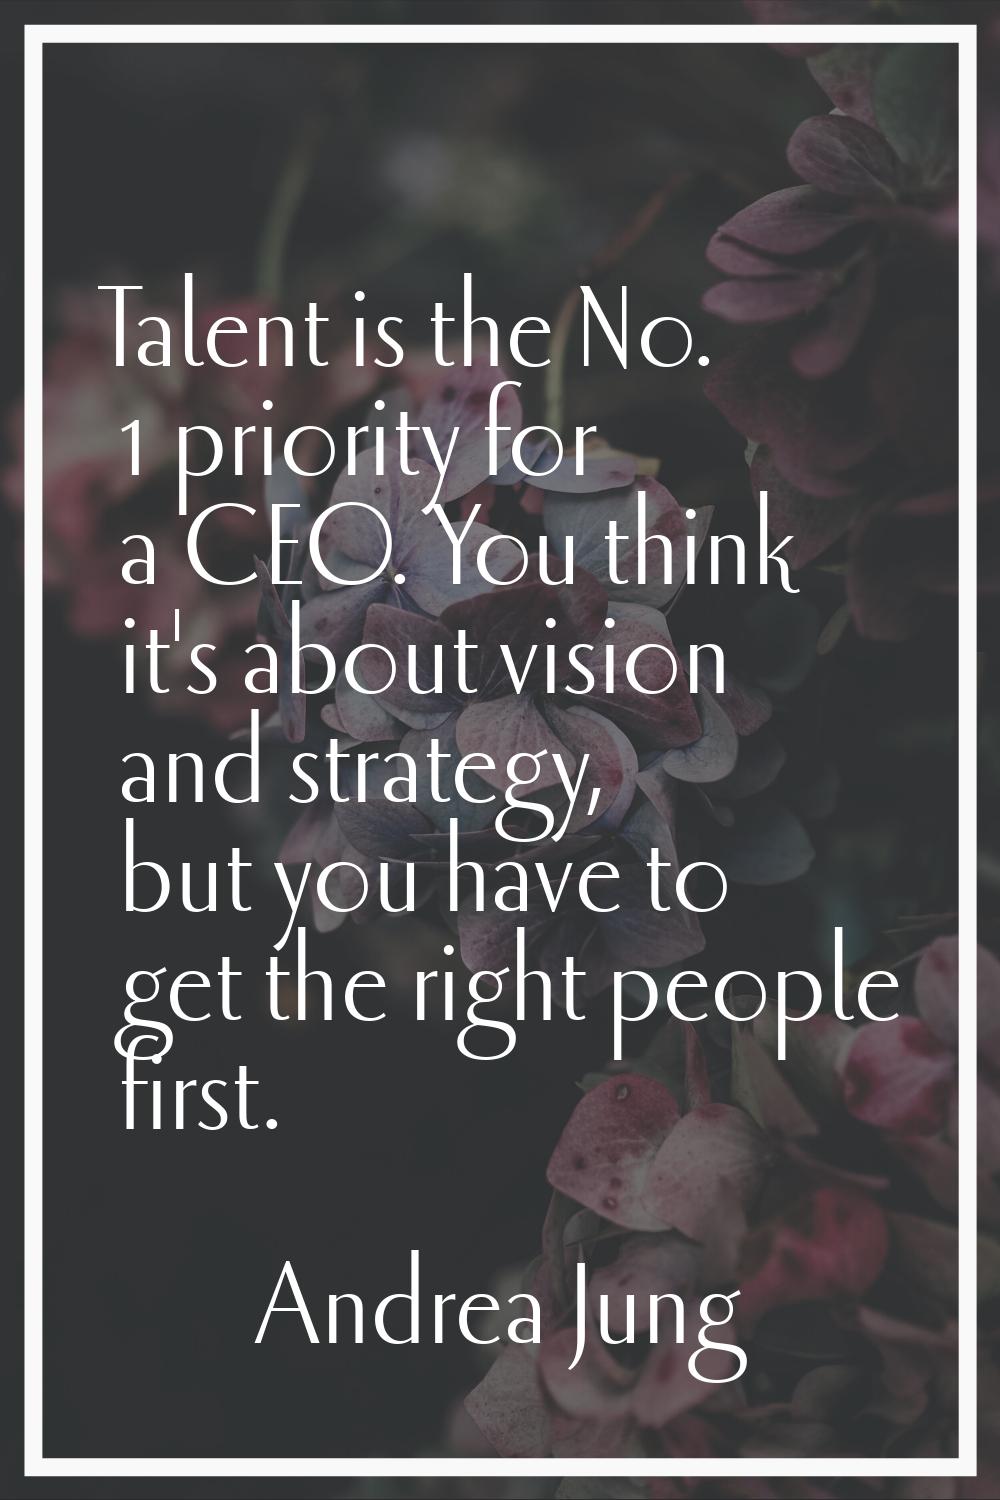 Talent is the No. 1 priority for a CEO. You think it's about vision and strategy, but you have to g